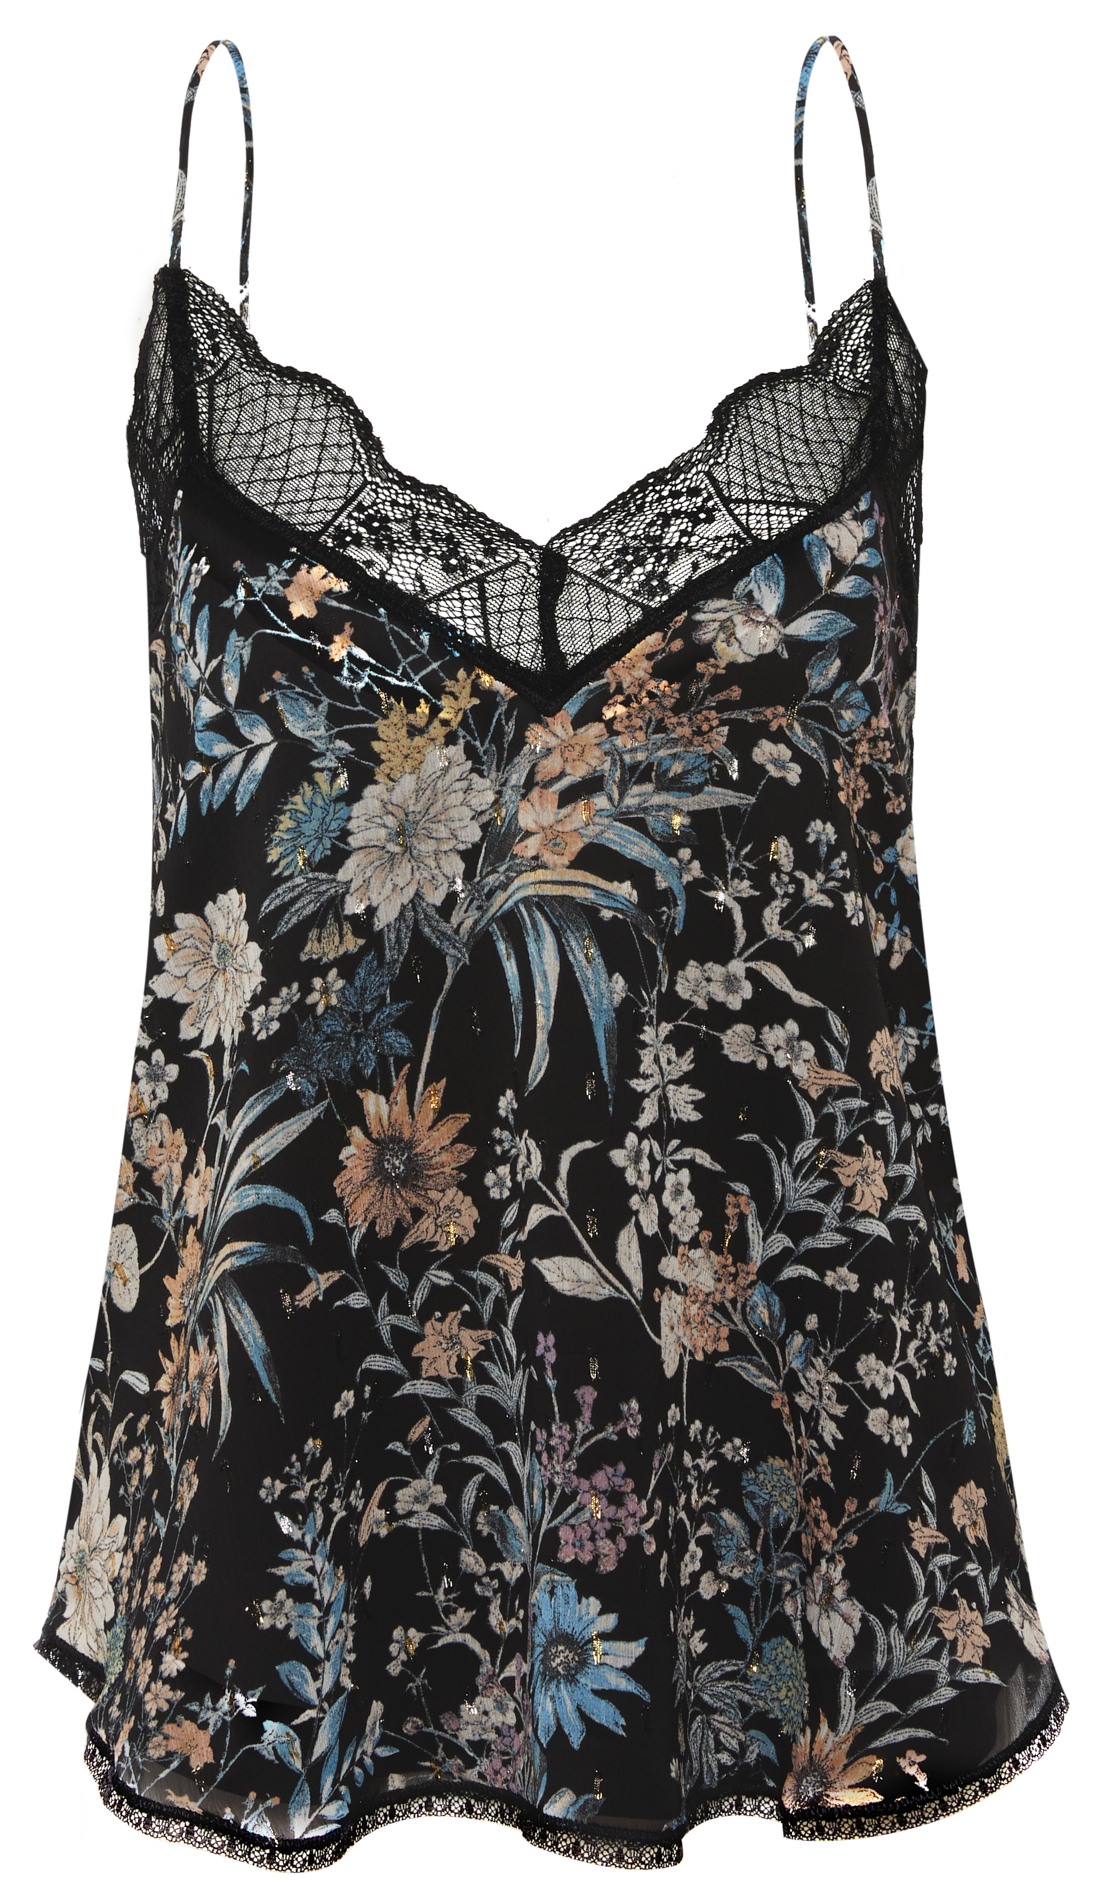 Printed Lace Cami